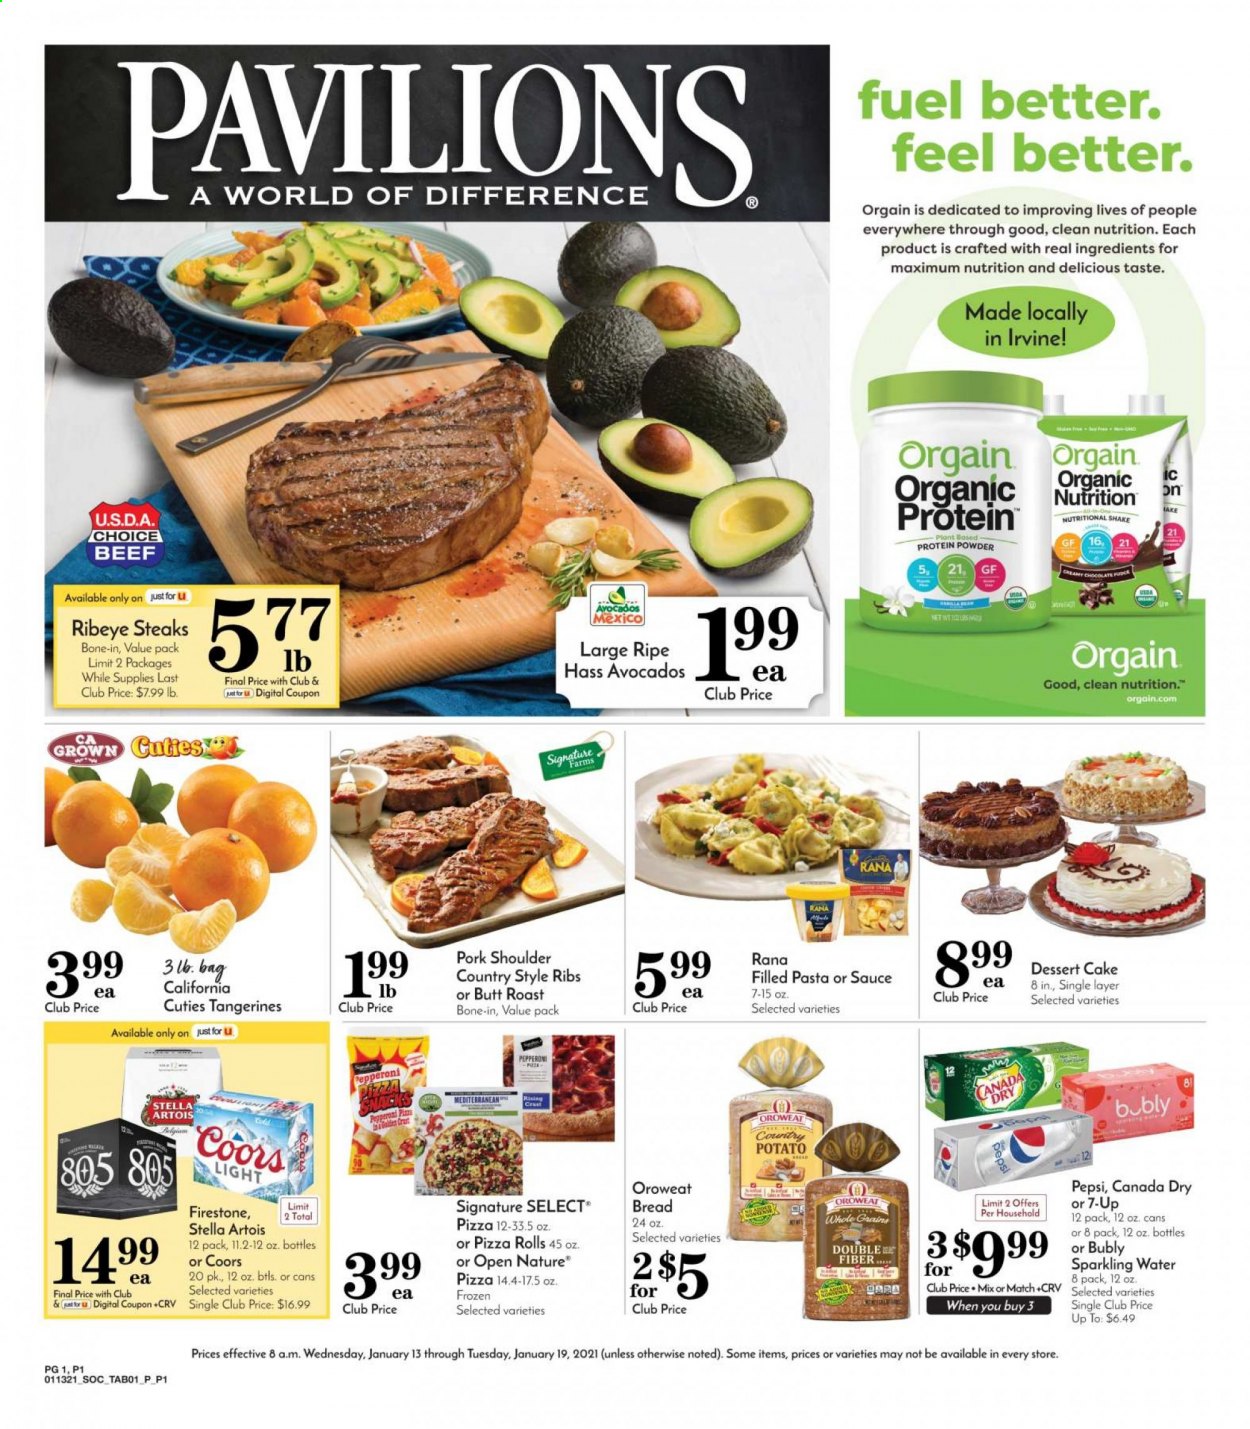 thumbnail - Pavilions Flyer - 01/13/2021 - 01/19/2021 - Sales products - Stella Artois, Coors, bread, pizza rolls, cake, pizza, Giovanni Rana, pepperoni, shake, chocolate, snack, pasta, Rana, Canada Dry, Pepsi, 7UP, sparkling water, beer, beef meat, steak, ribeye steak, pork meat, pork shoulder, country style ribs, bag, whey protein, avocado, tangerines. Page 1.